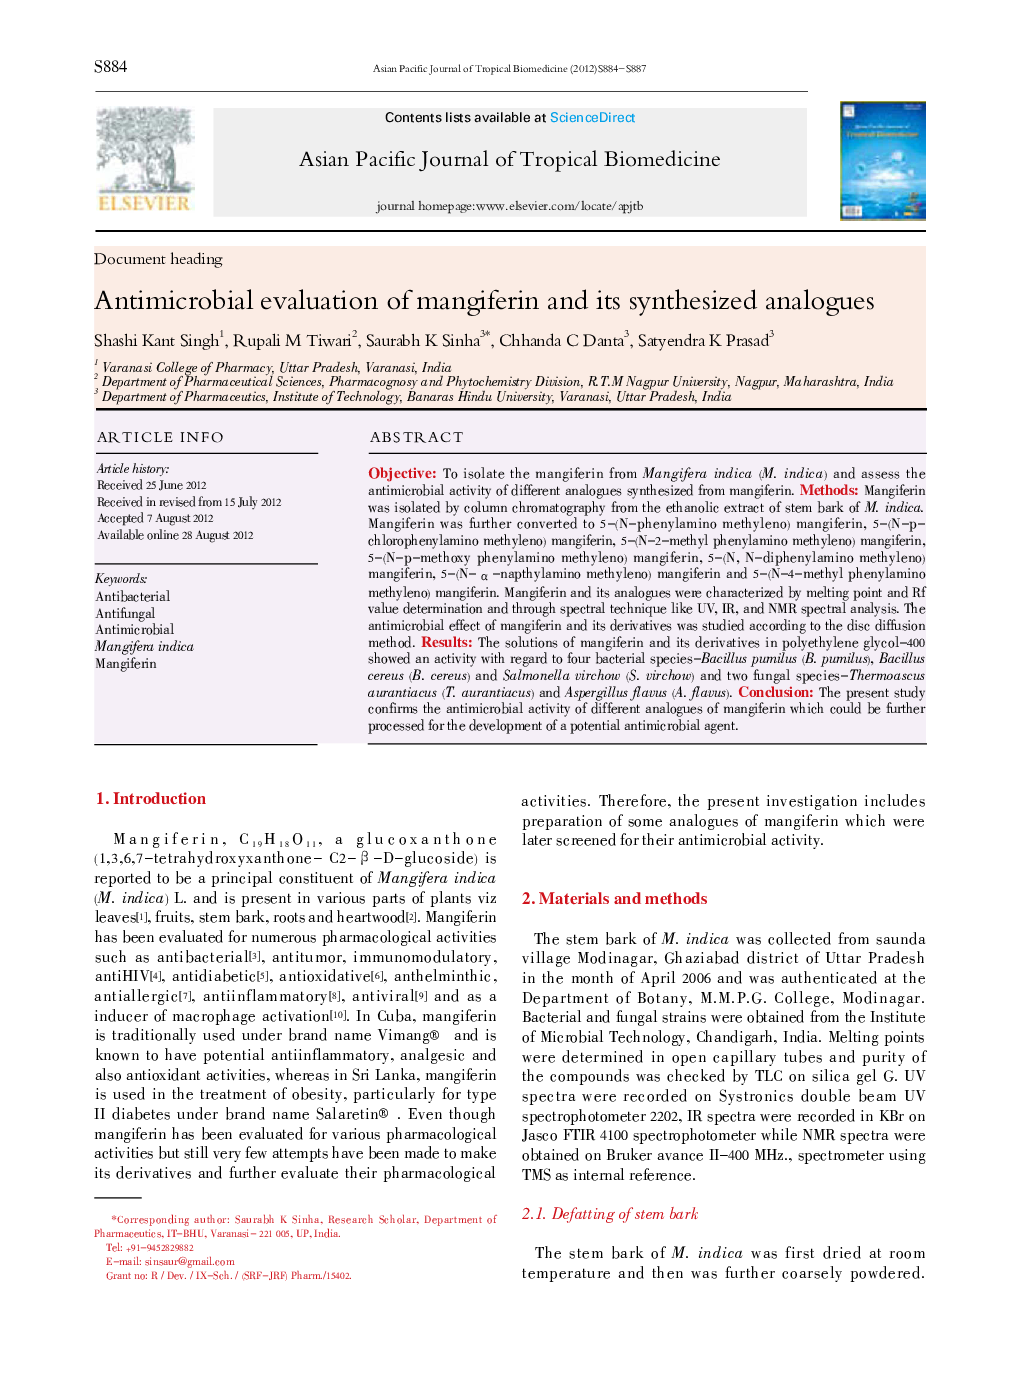 Antimicrobial evaluation of mangiferin and its synthesized analogues